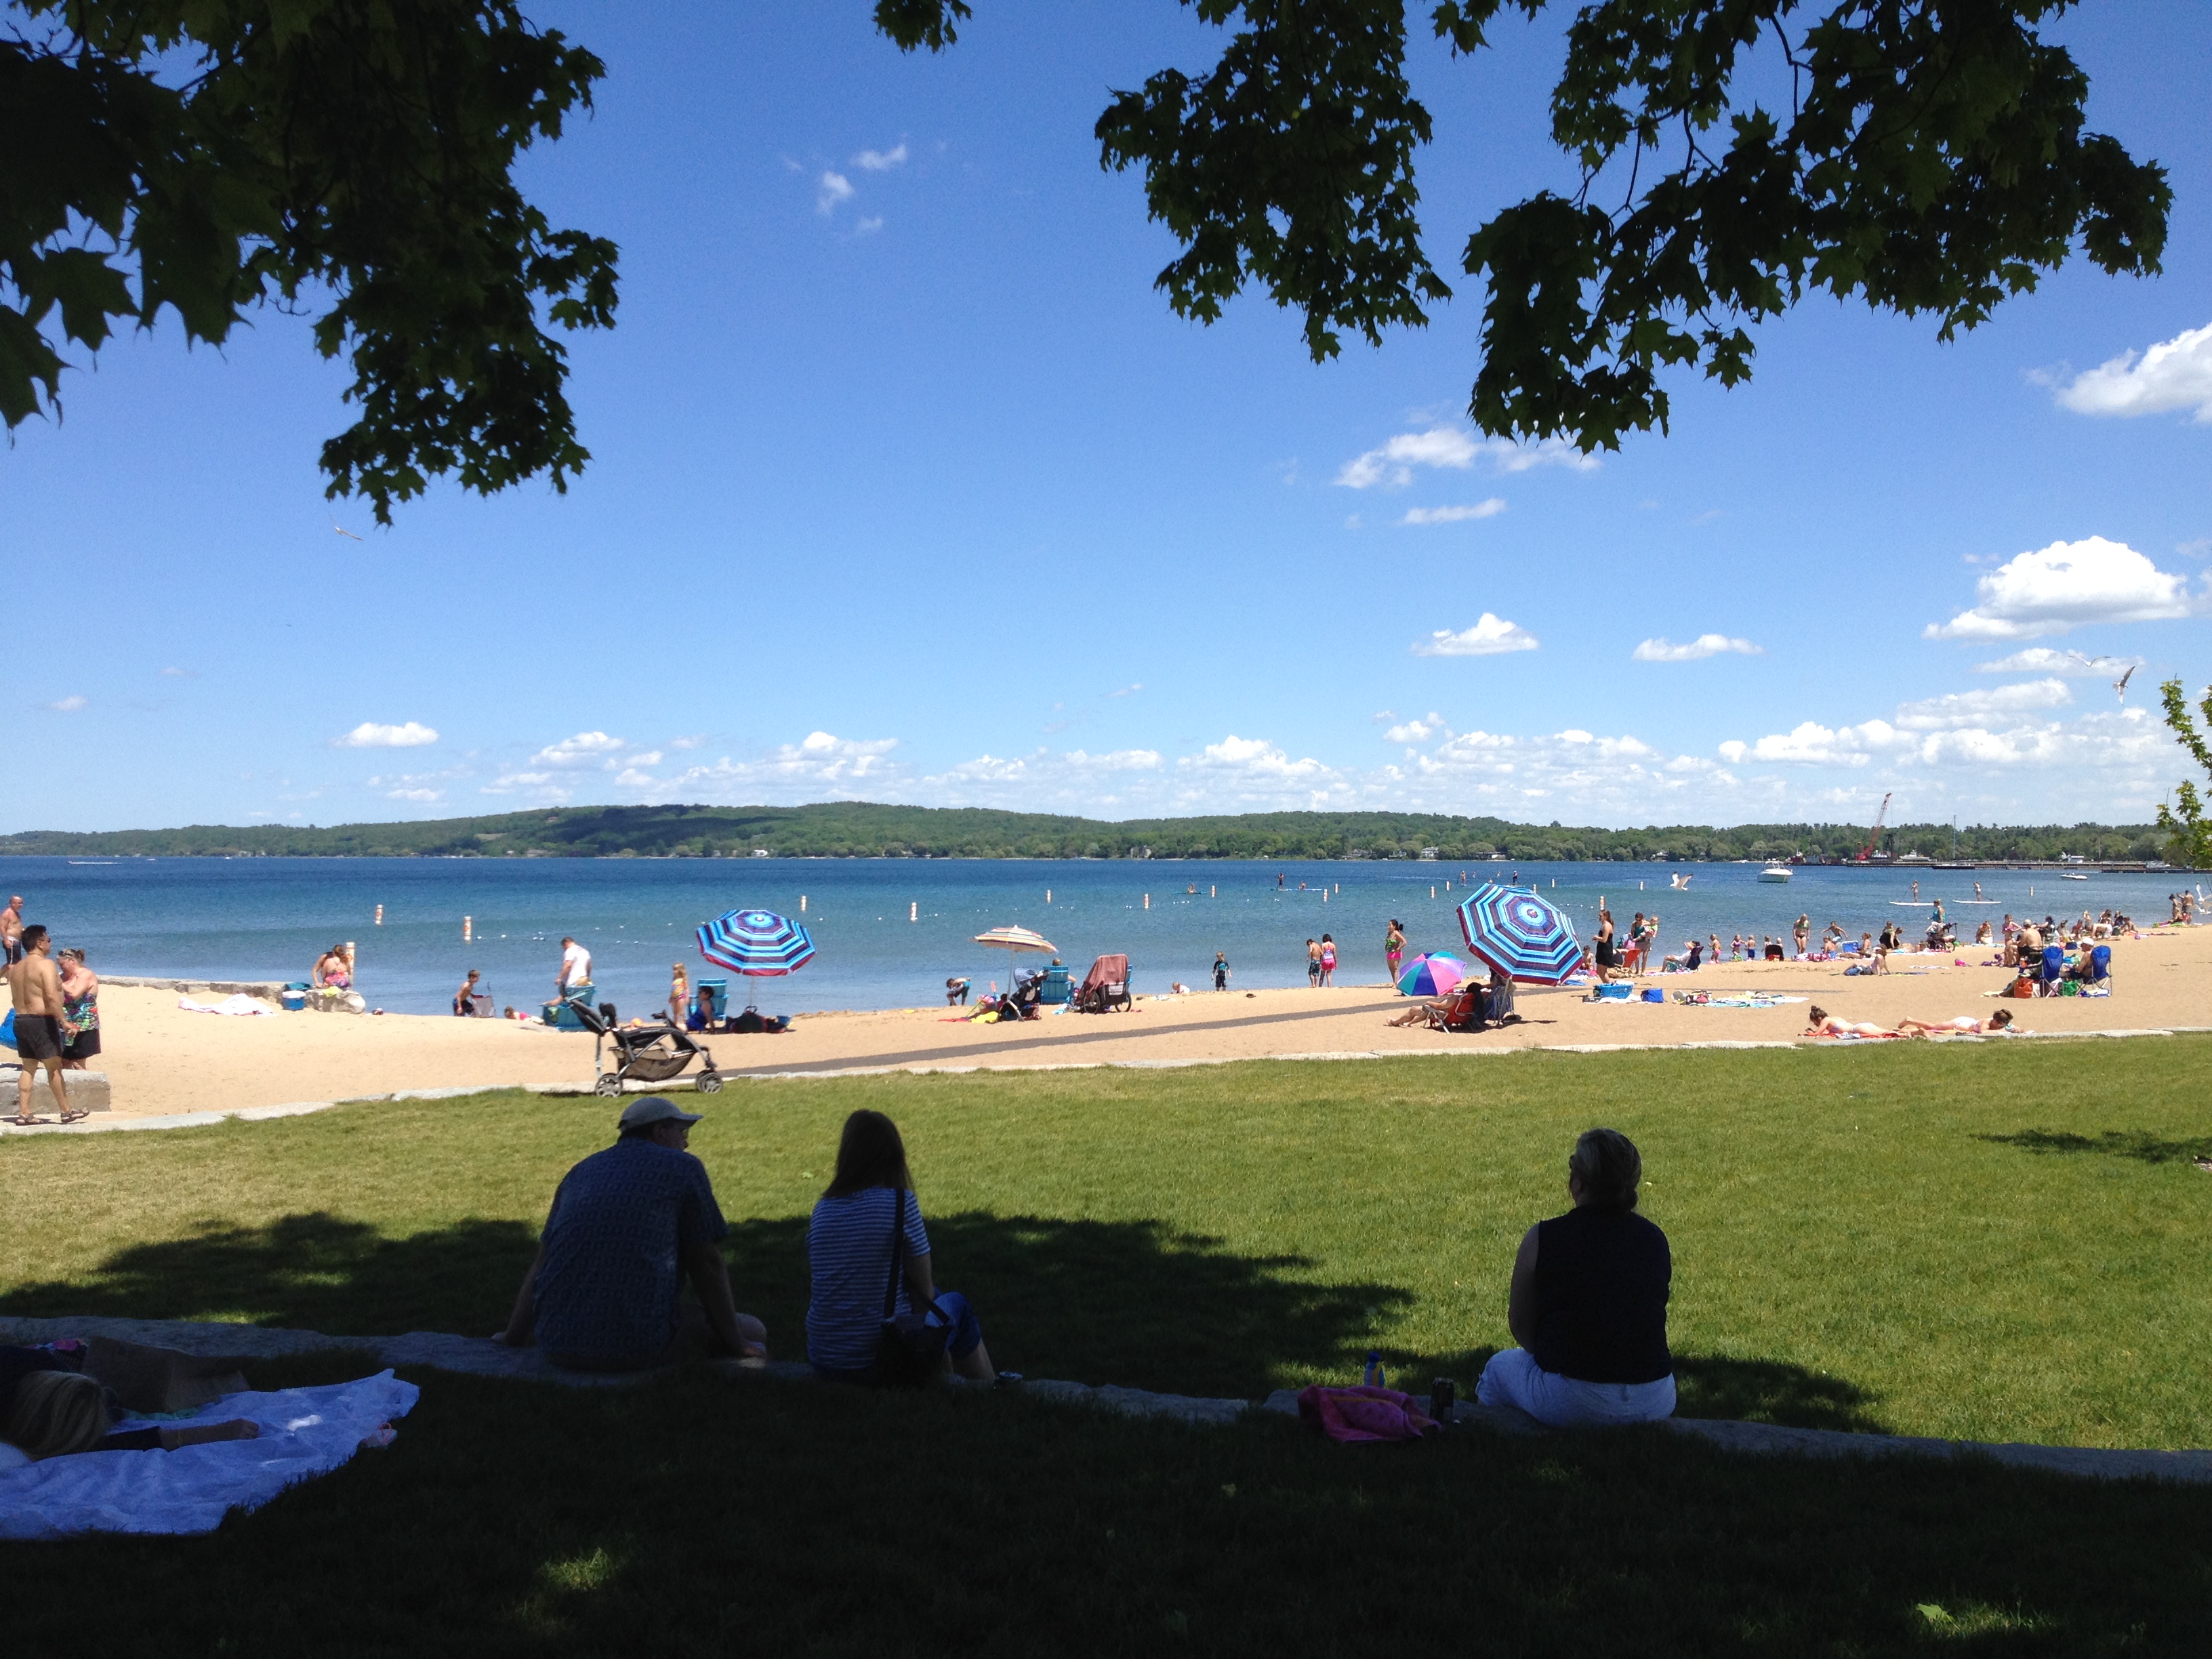 Summer afternoon in Downtown Traverse City